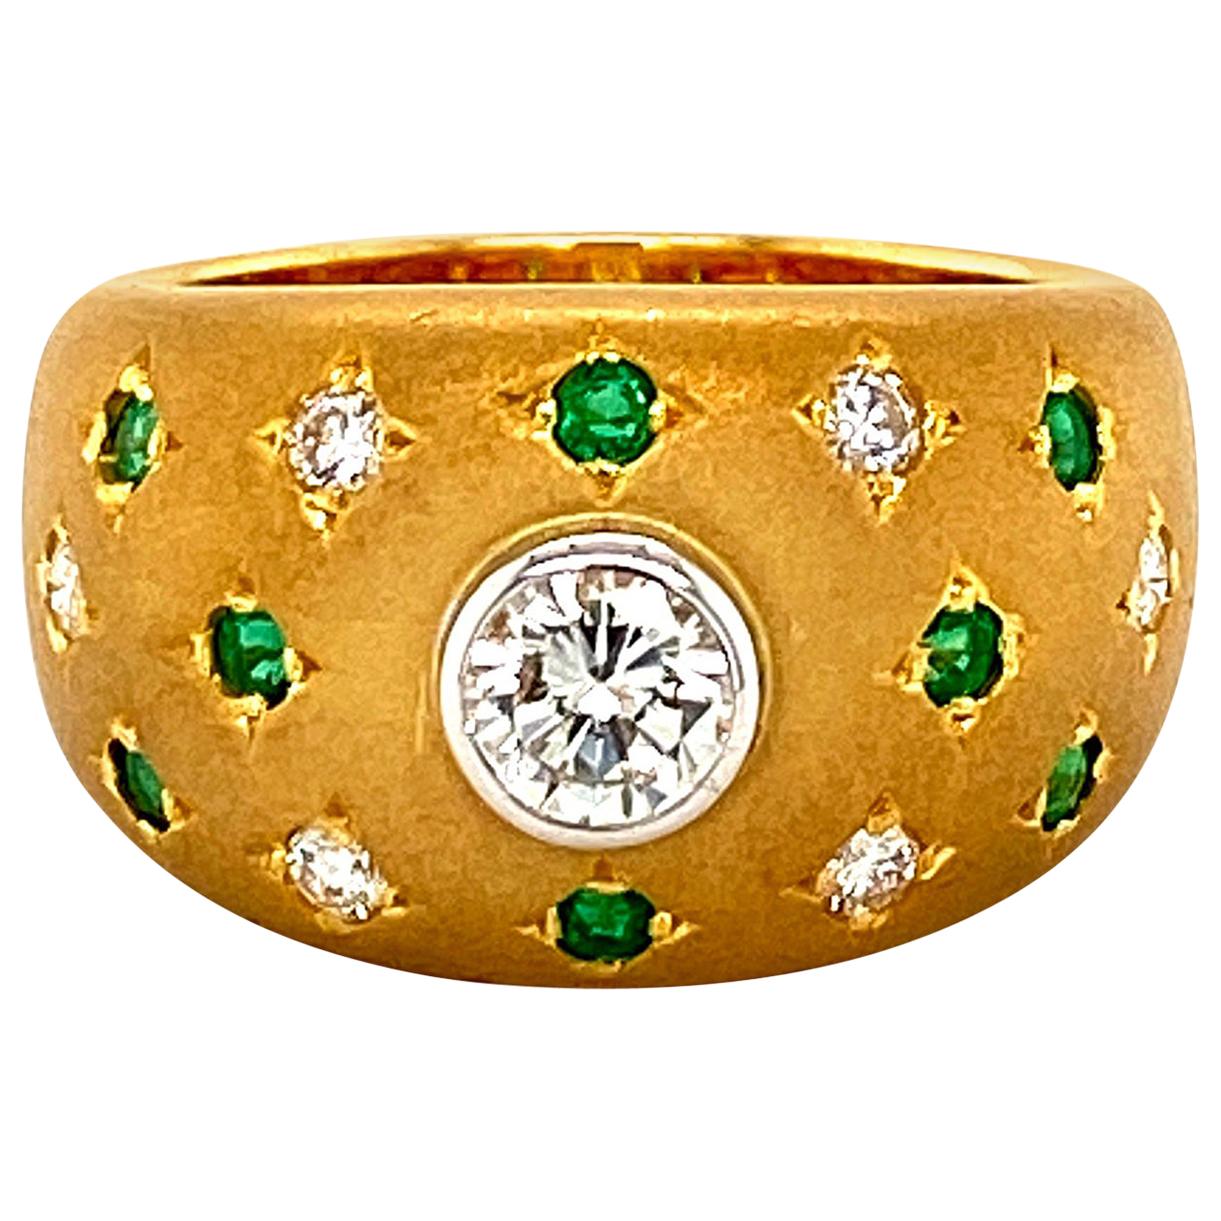 Starry Diamond and Emerald Band Ring in 18 Karat Gold with Vintage Matte Finish